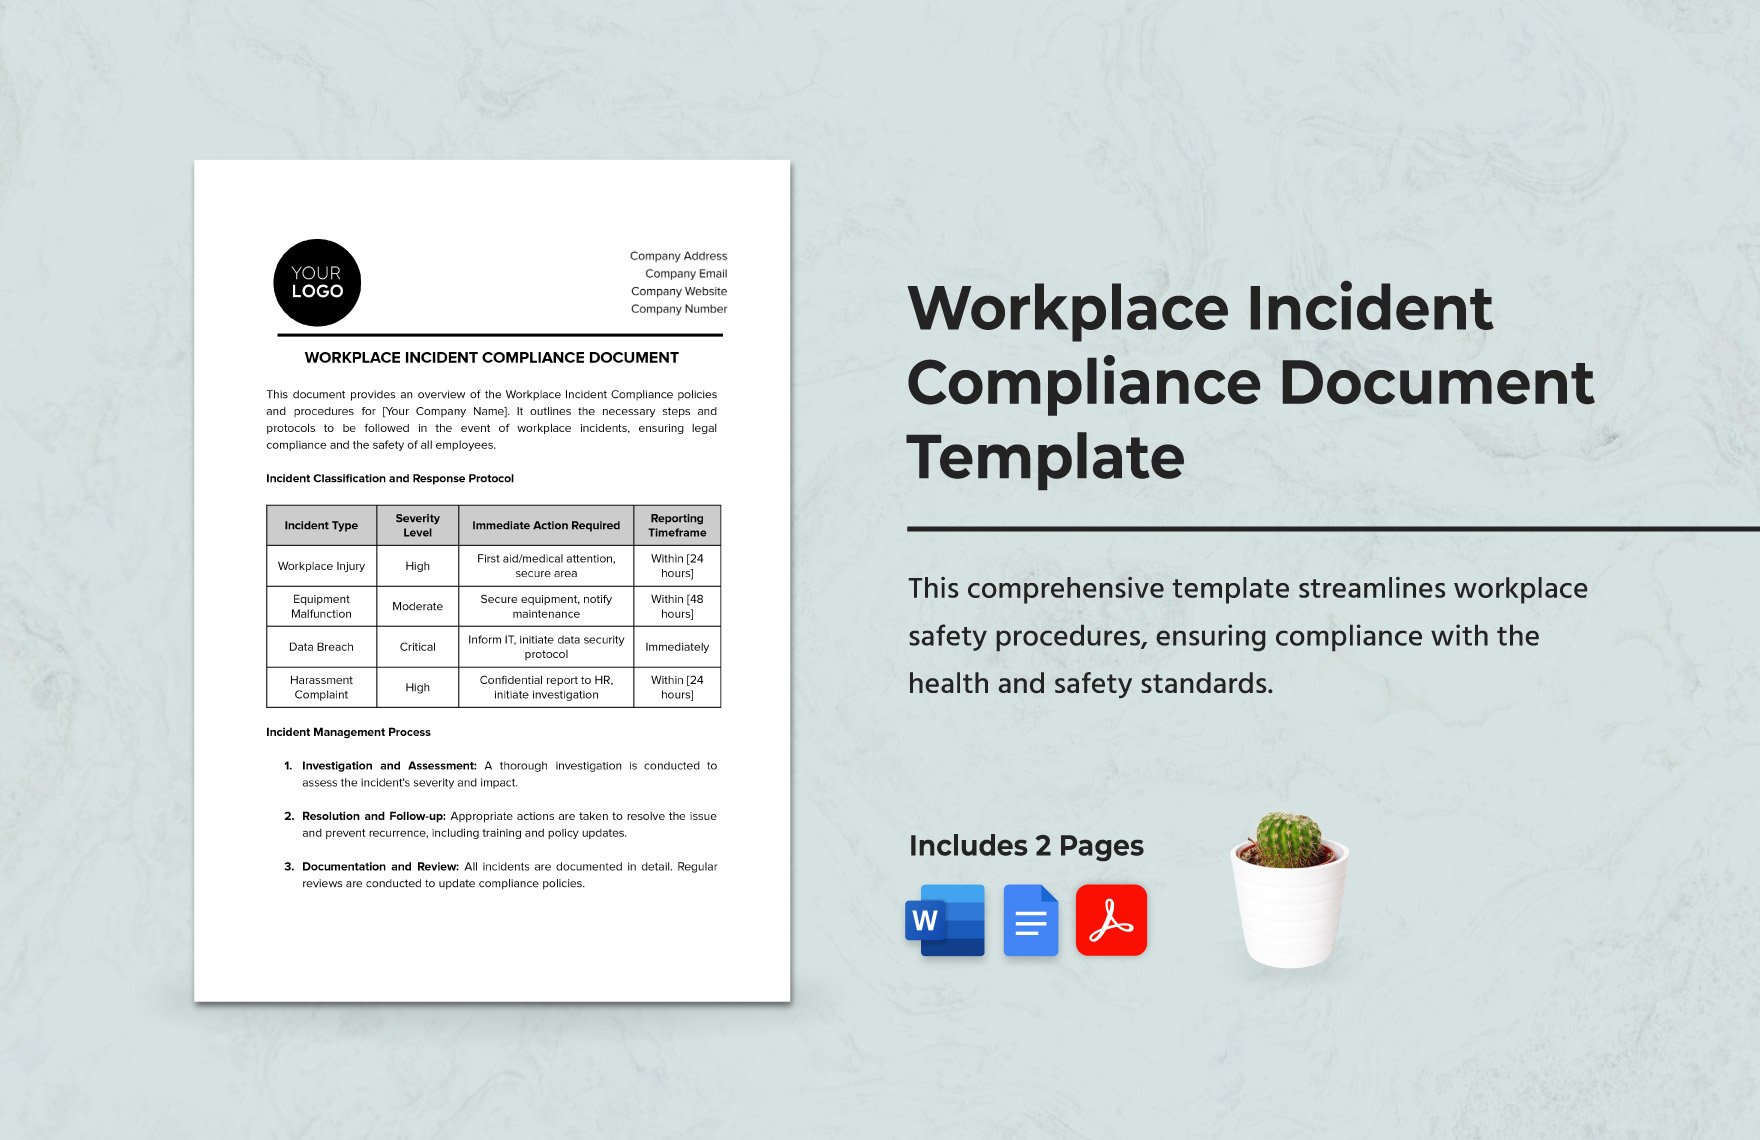 Workplace Incident Compliance Document Template in Word, Google Docs, PDF